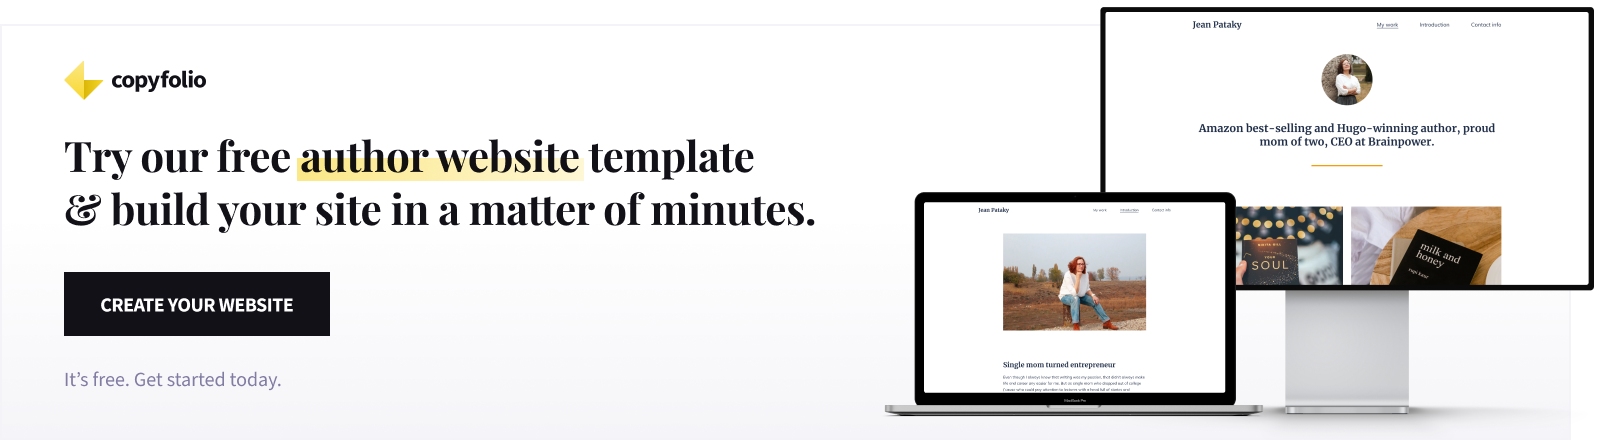 try this author website template to create an author page easily